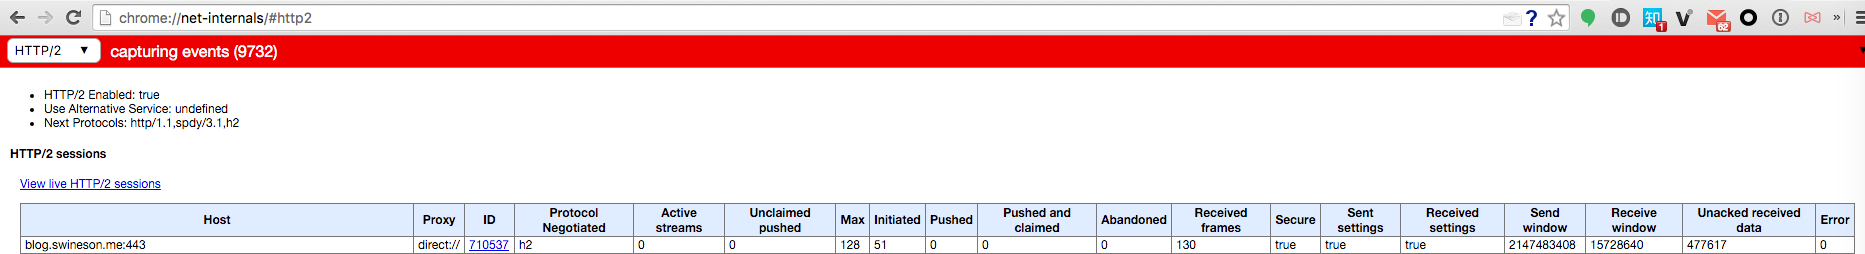 A screen capture of Chrome showing HTTP/2 has been enabled for blog.swineson.me